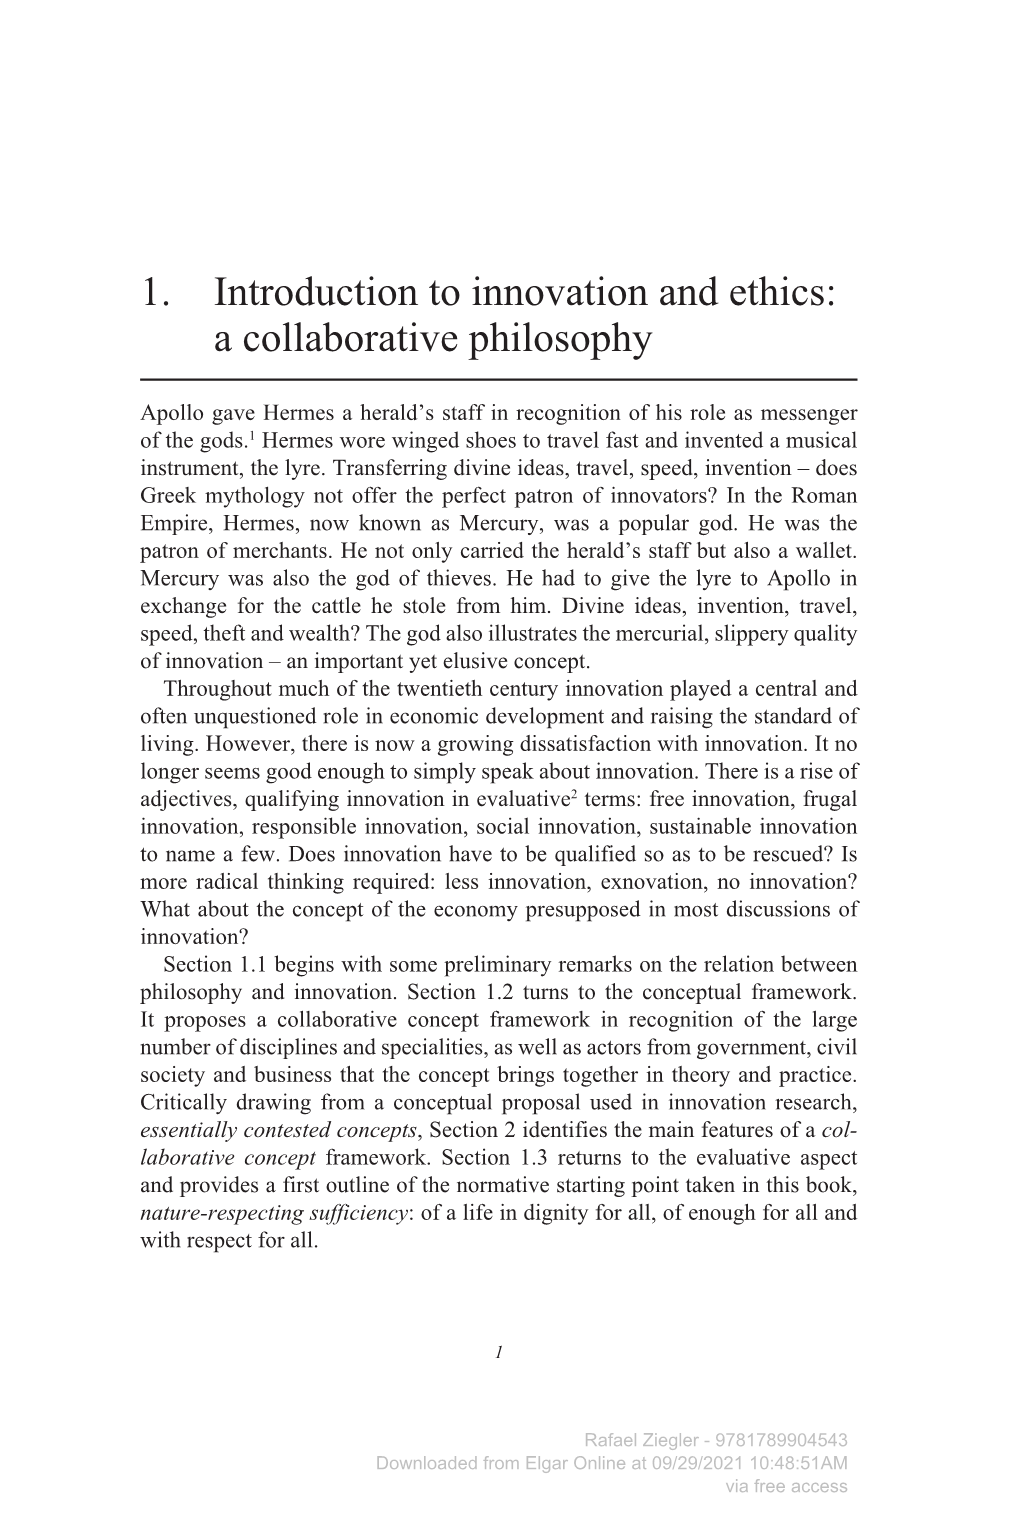 1. Introduction to Innovation and Ethics: a Collaborative Philosophy